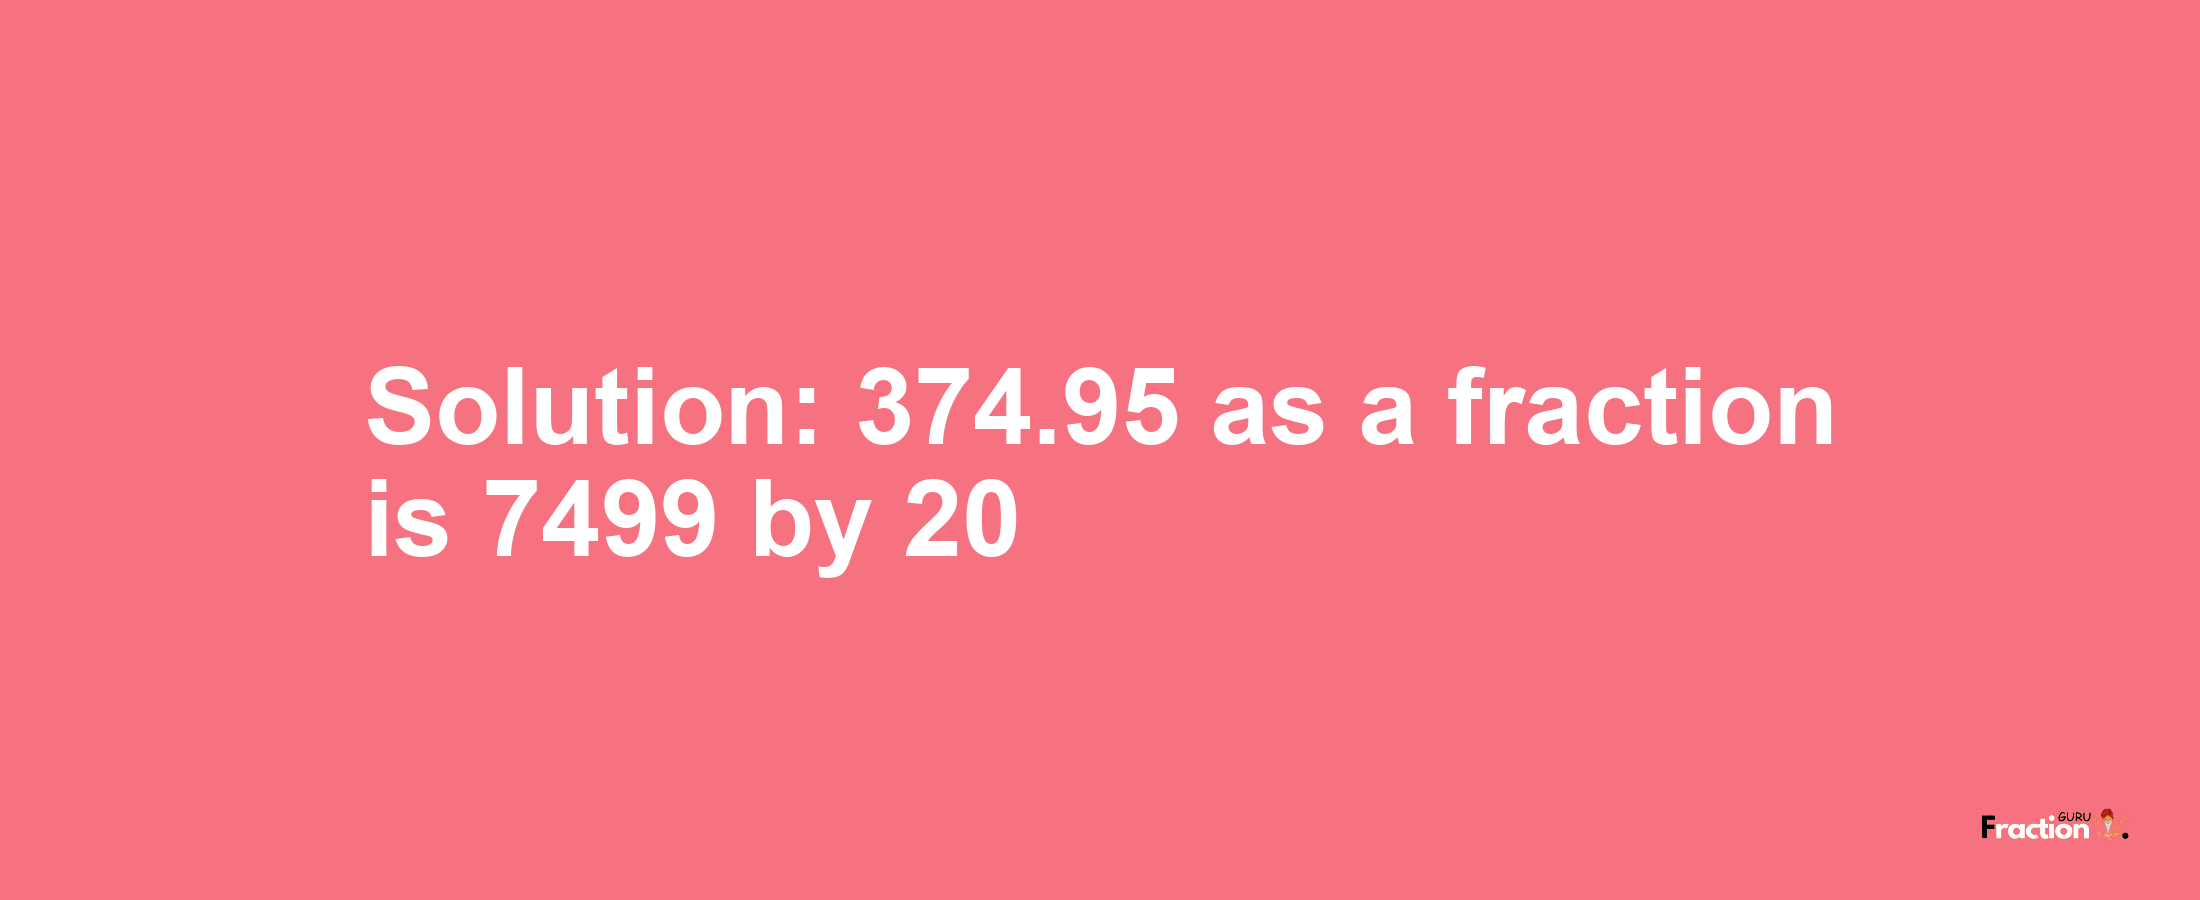 Solution:374.95 as a fraction is 7499/20